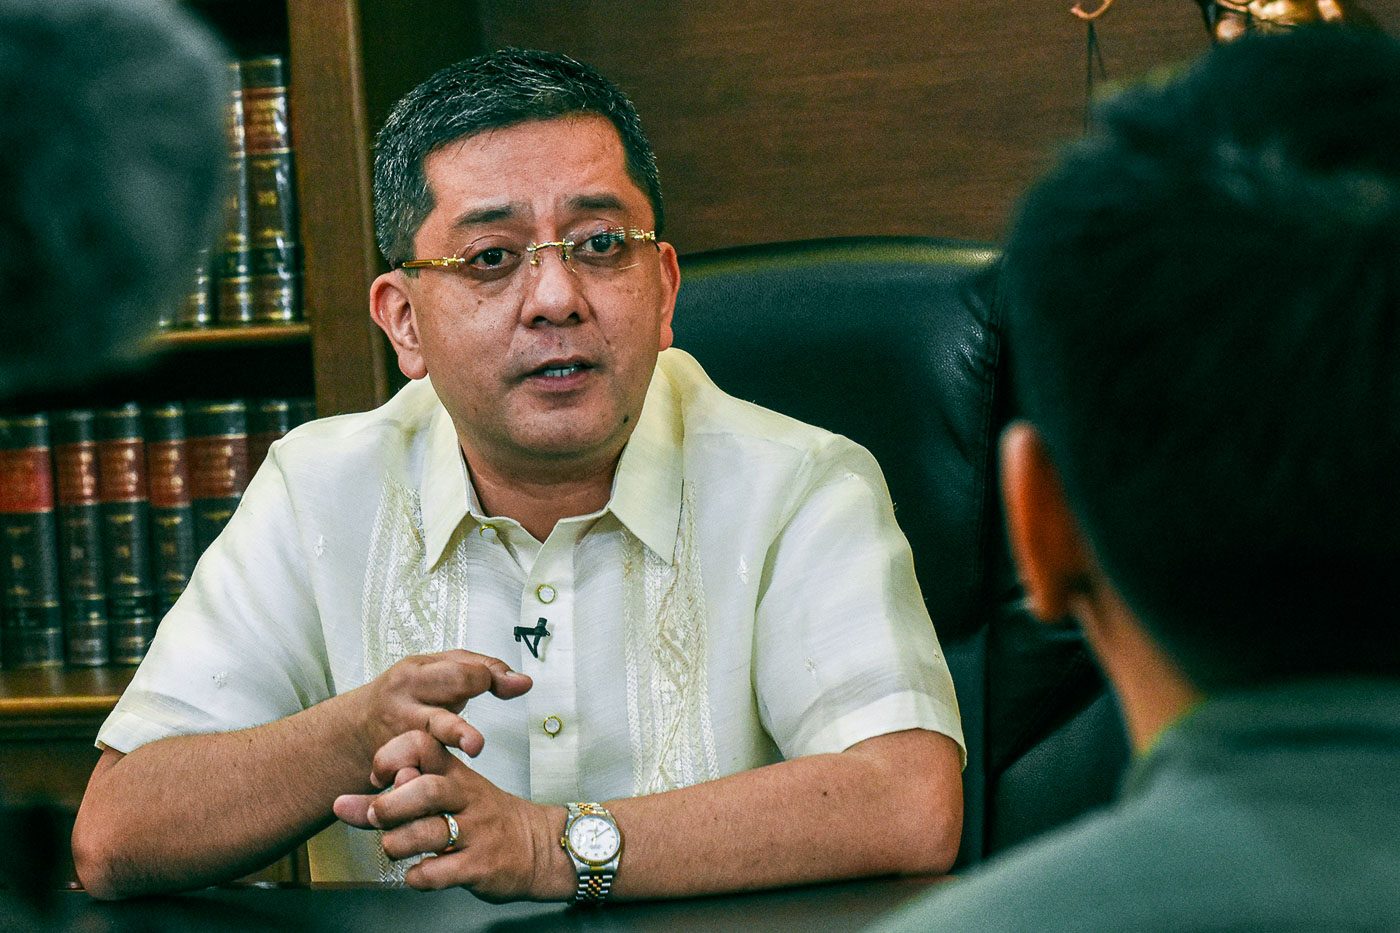 ‘To my last breath’: Comelec chief pushes to retire 90,000 voting machines